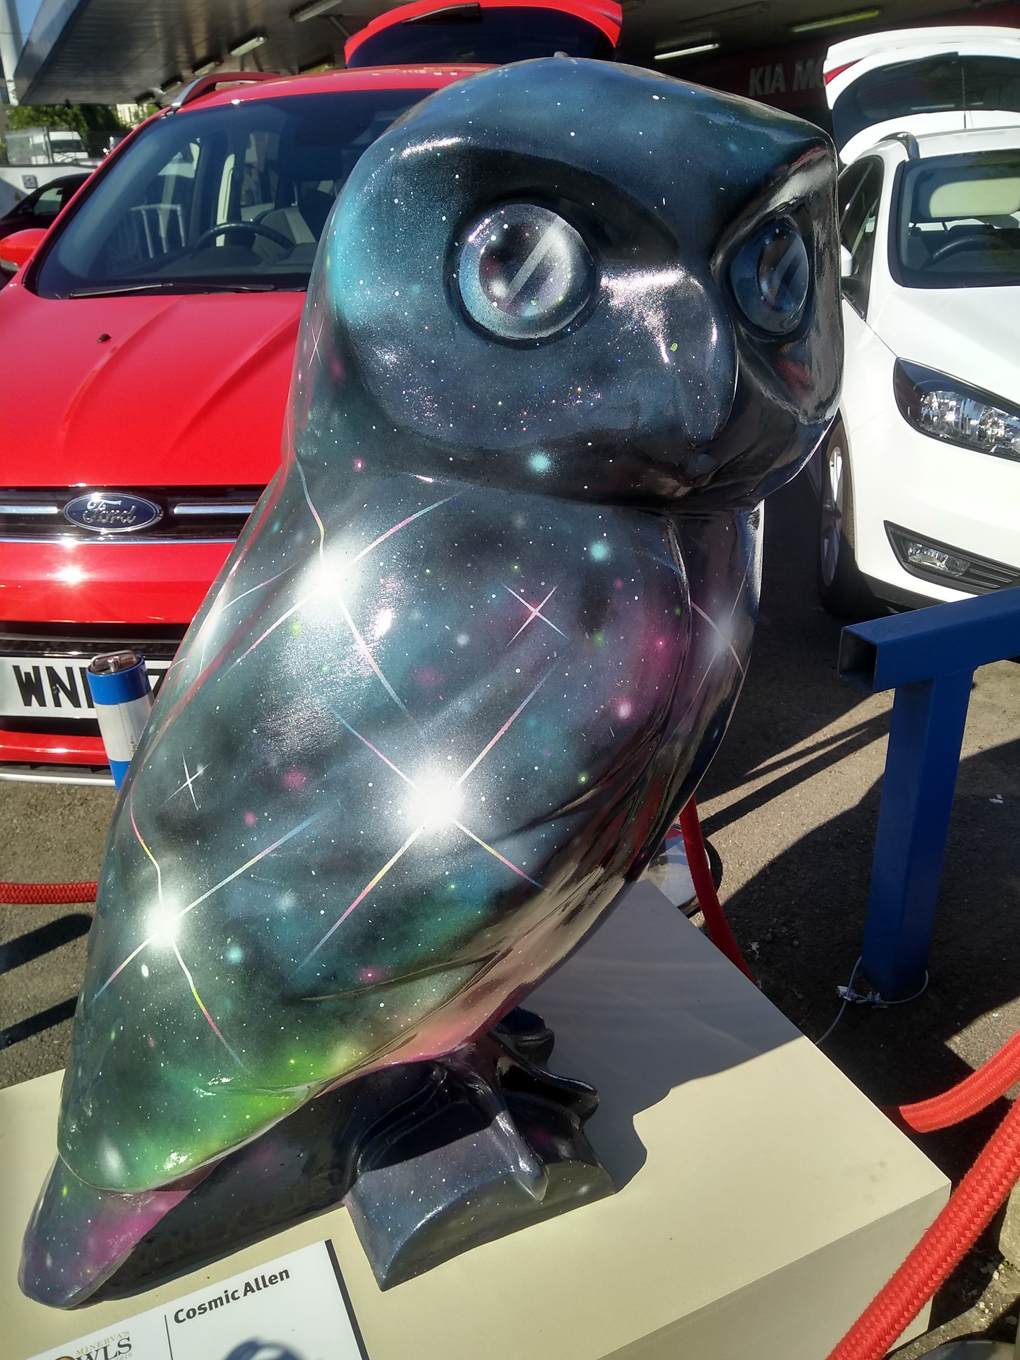 A giant model of an owl painted with the cosmos in a car dealership forecourt.